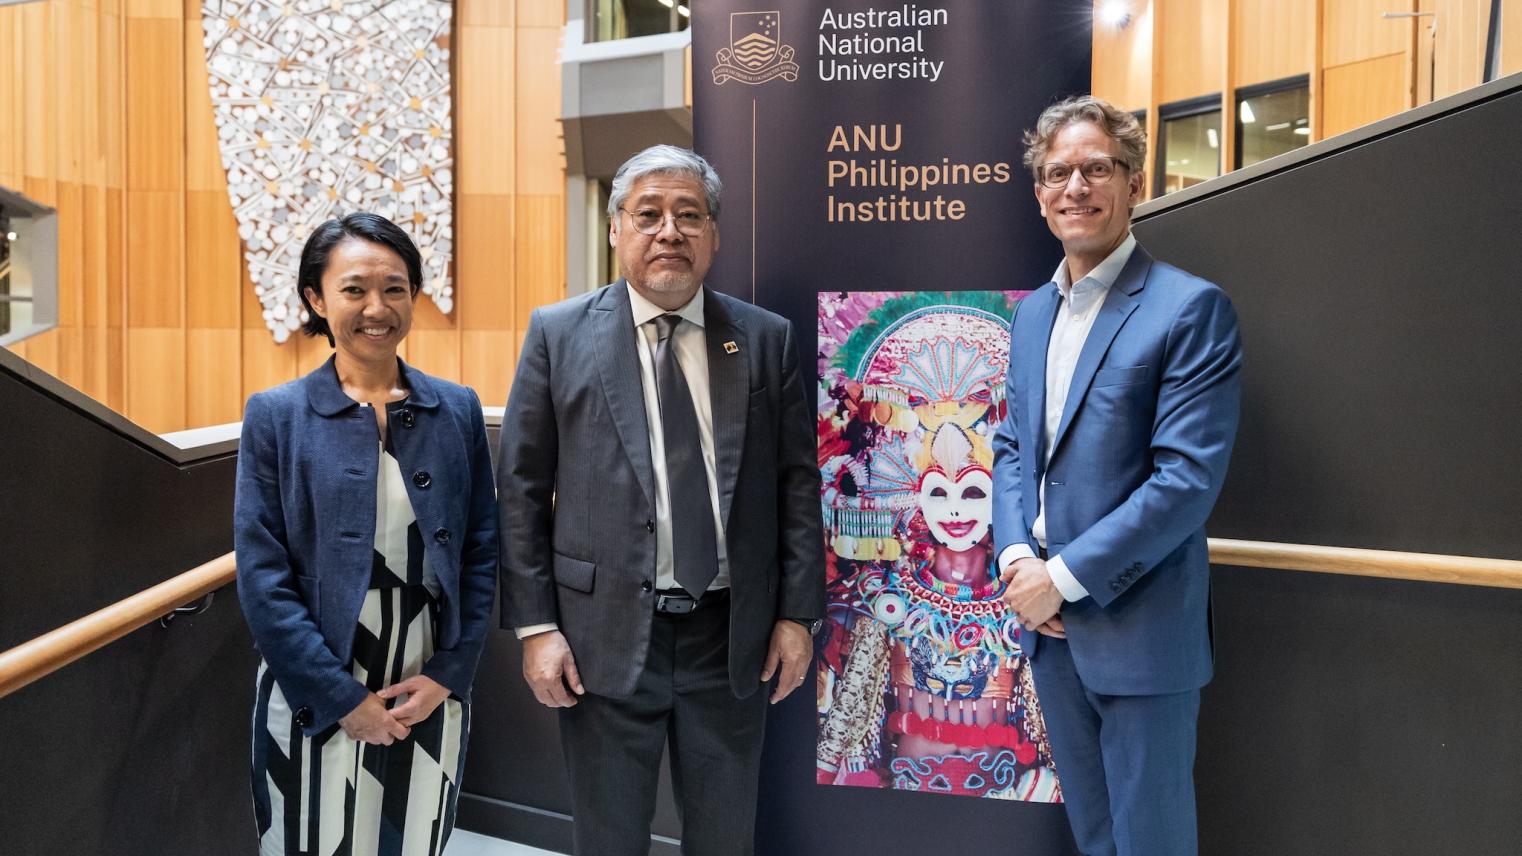 Secretary Manalo stands with ANU Philippines Institute director Björn Dressel and visiting Secretary for Southeast Asia and Global Partners in DFAT Michelle Chan.